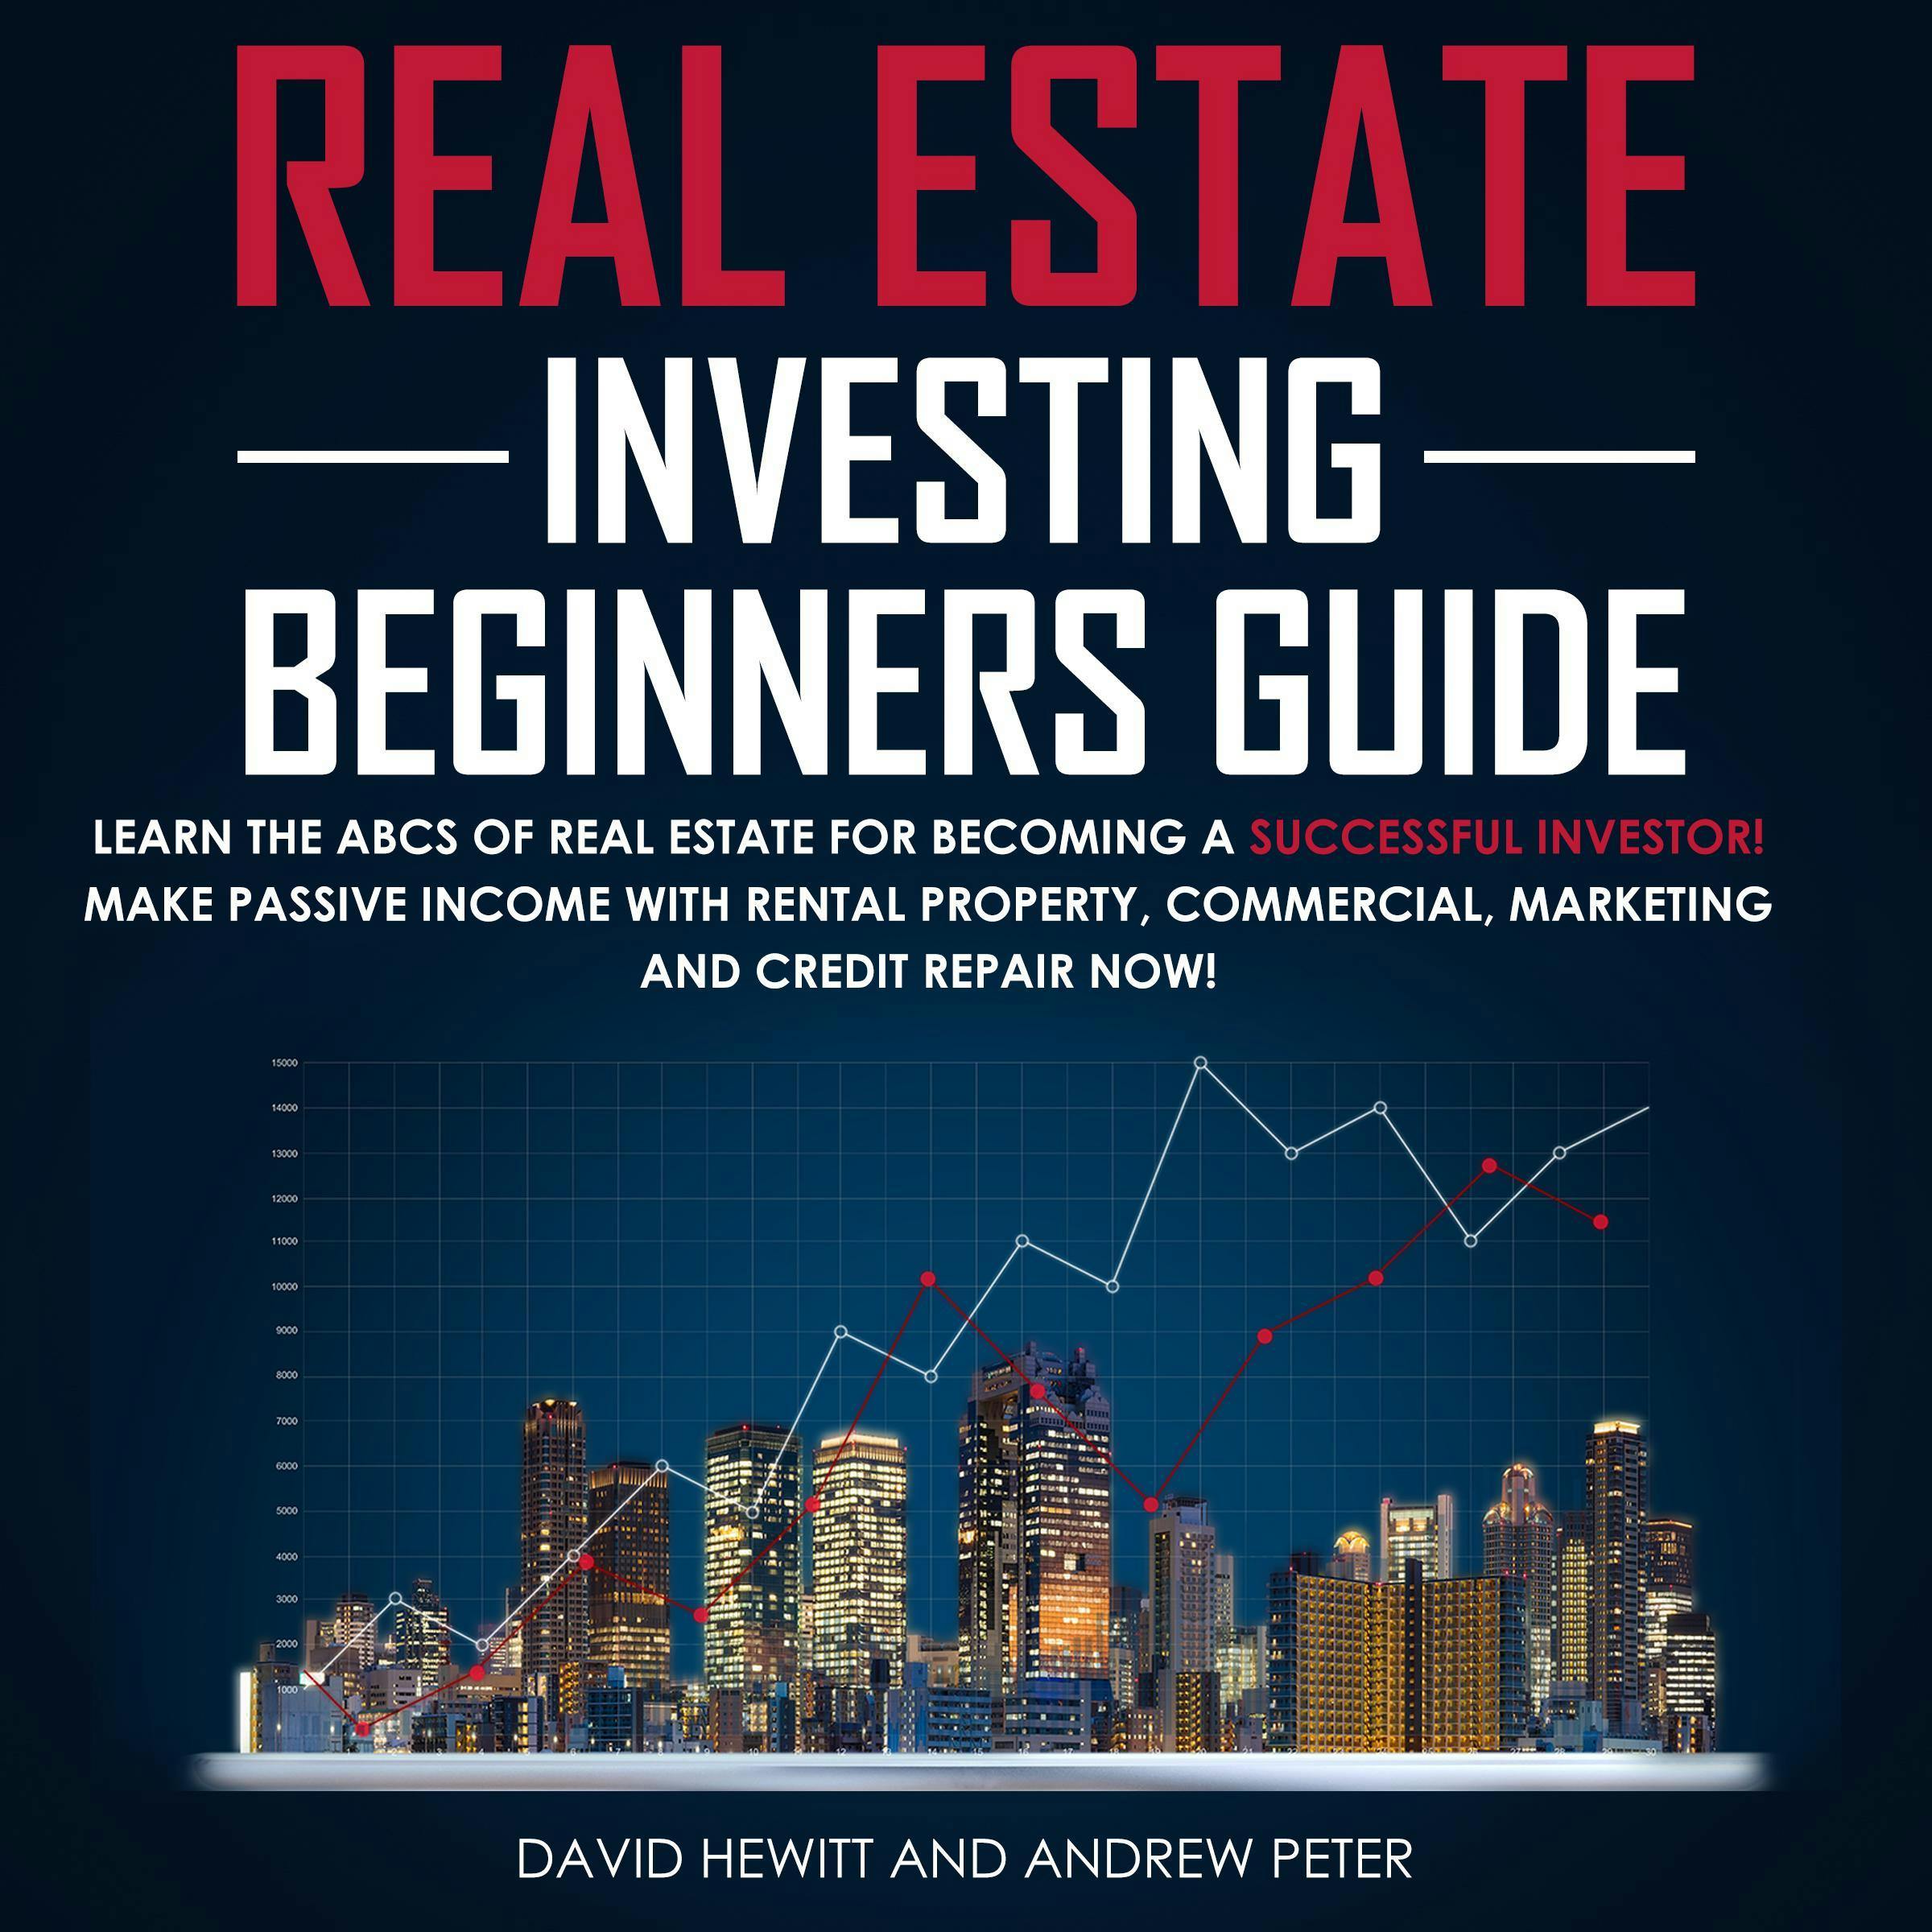 Real Estate Investing Beginners Guide: Learn the ABCs of Real Estate for Becoming a Successful Investor! Make Passive Income with Rental Property, Commercial, Marketing, and Credit Repair Now! - undefined